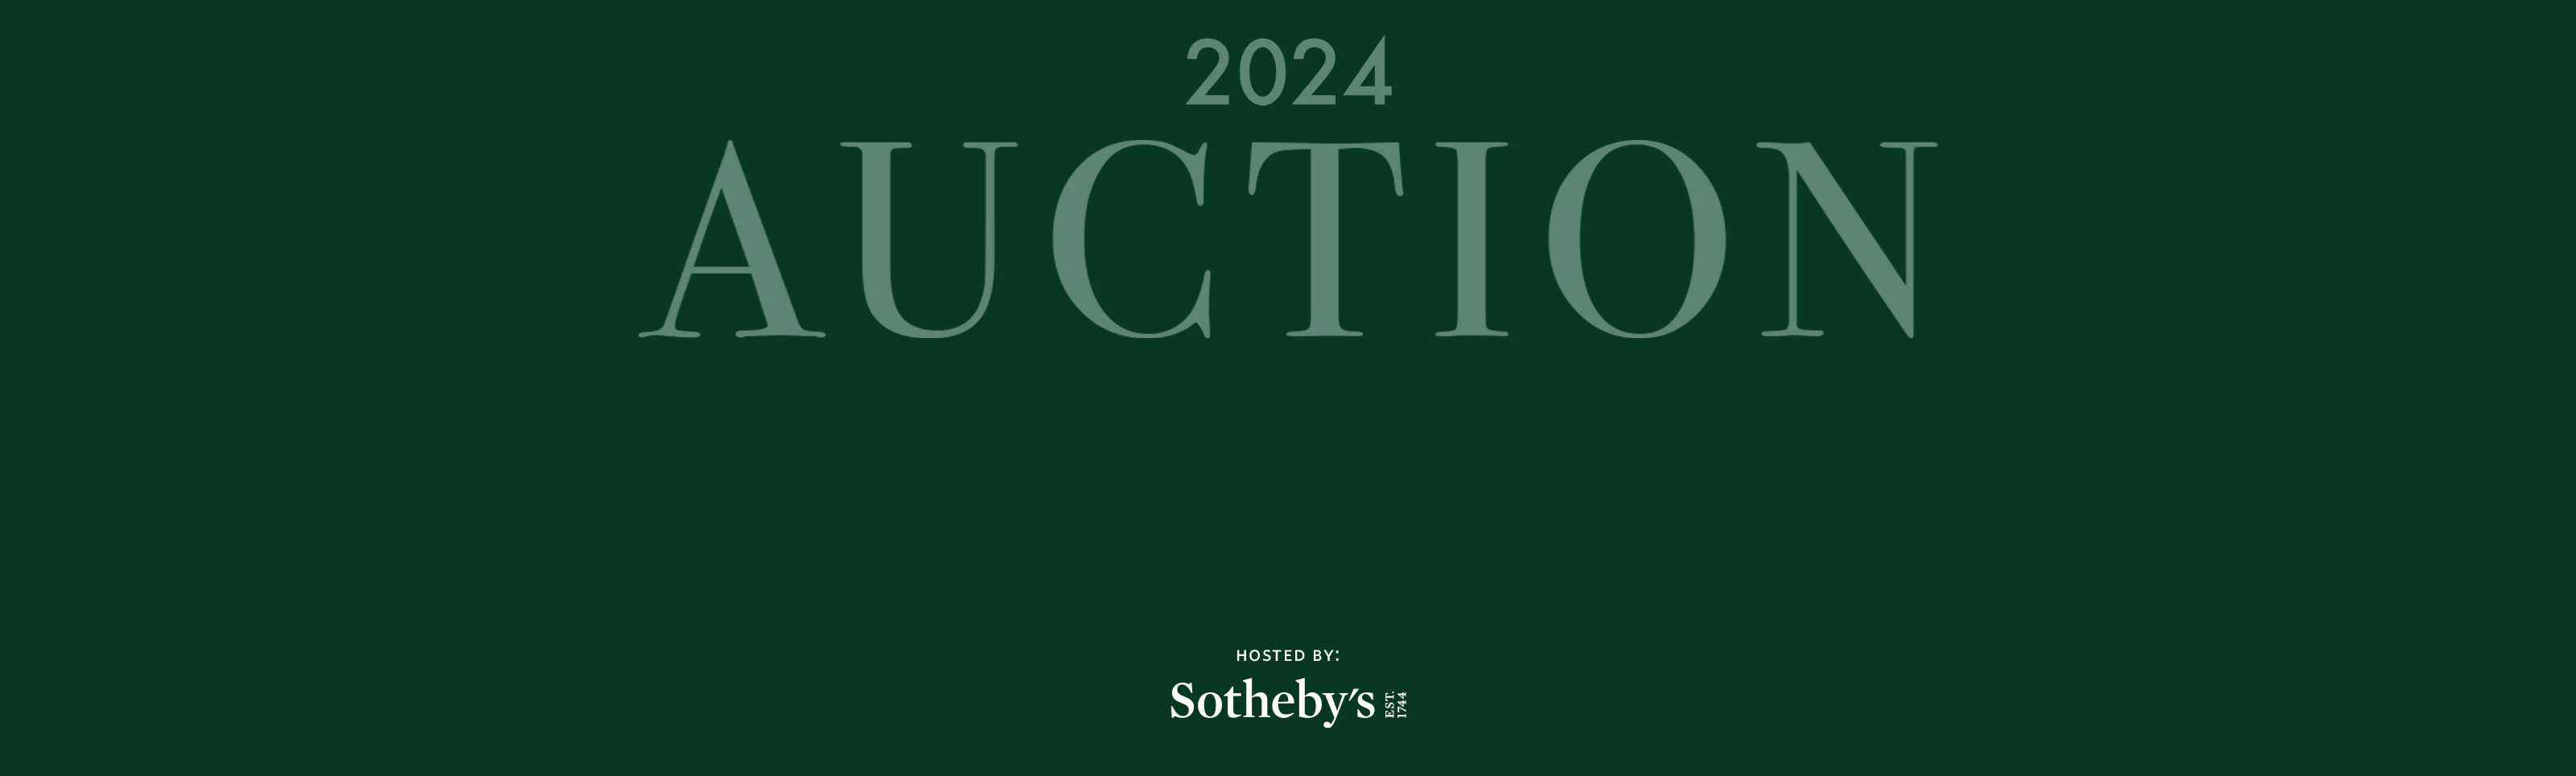 2024 Auction preview image